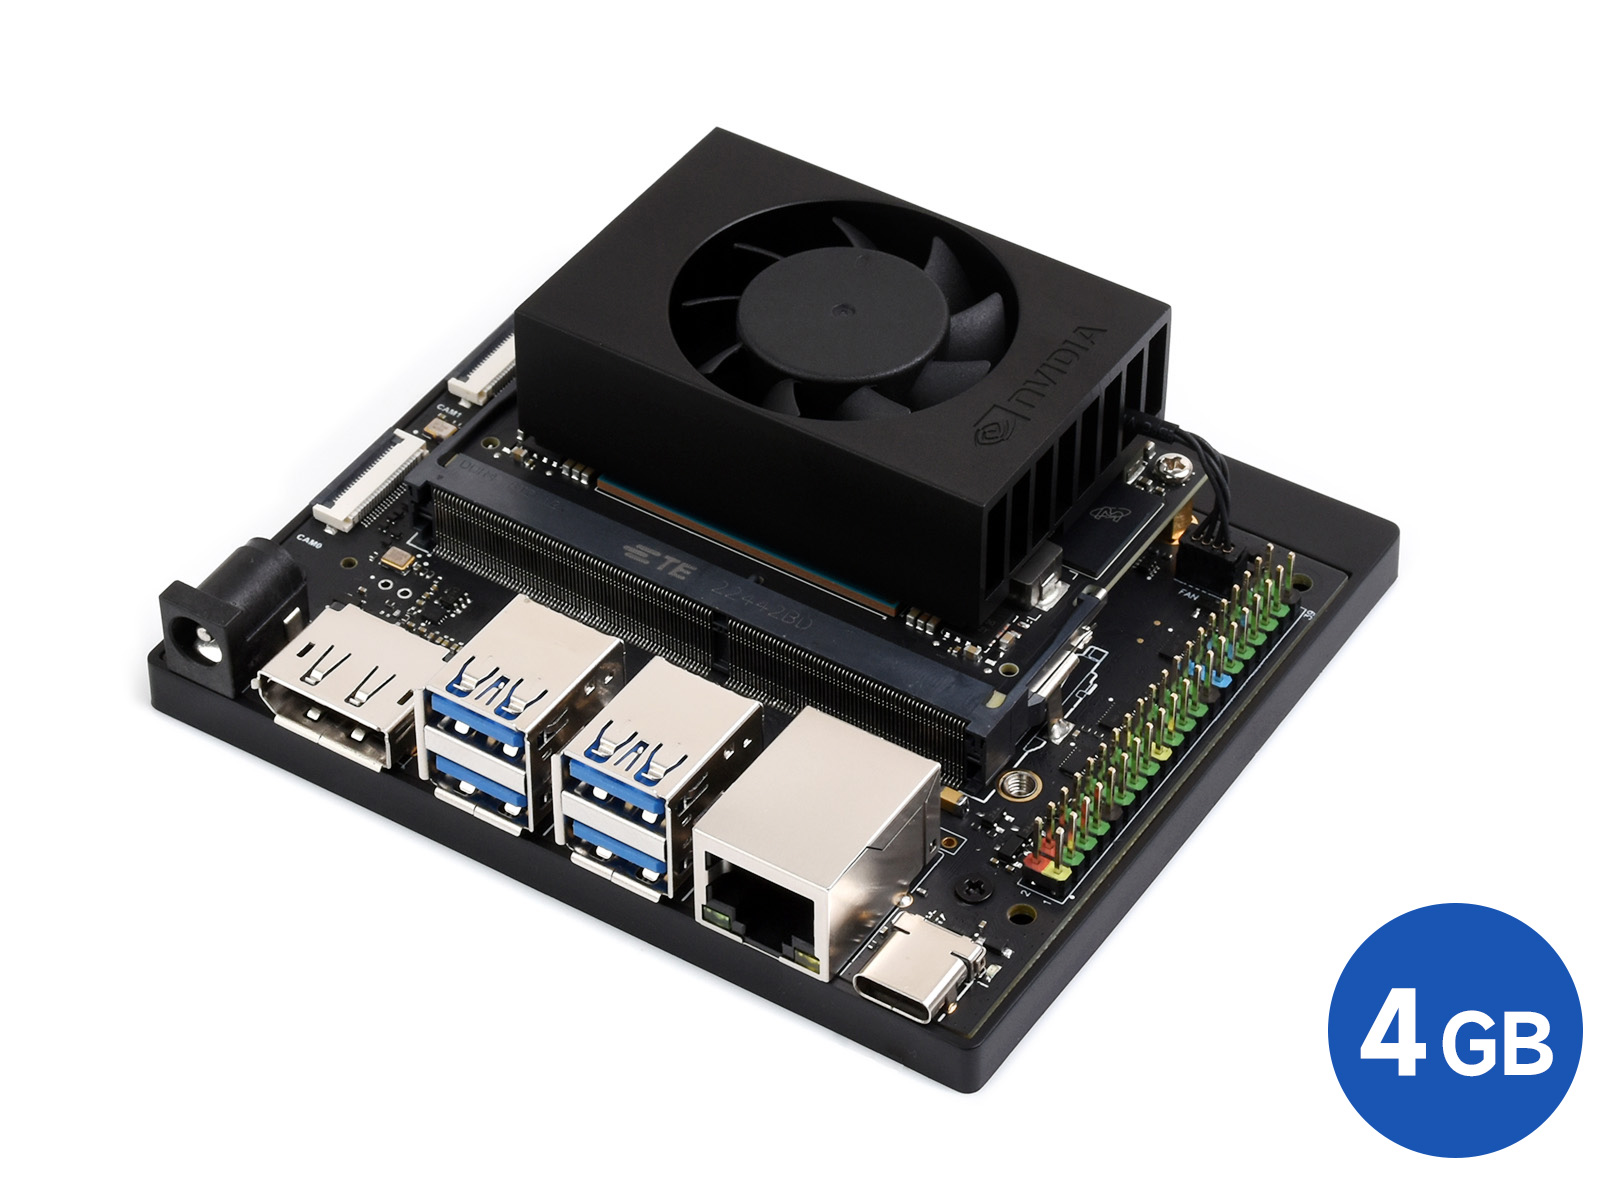 Jetson Orin Nano AI Development Kit For Embedded And Edge Systems